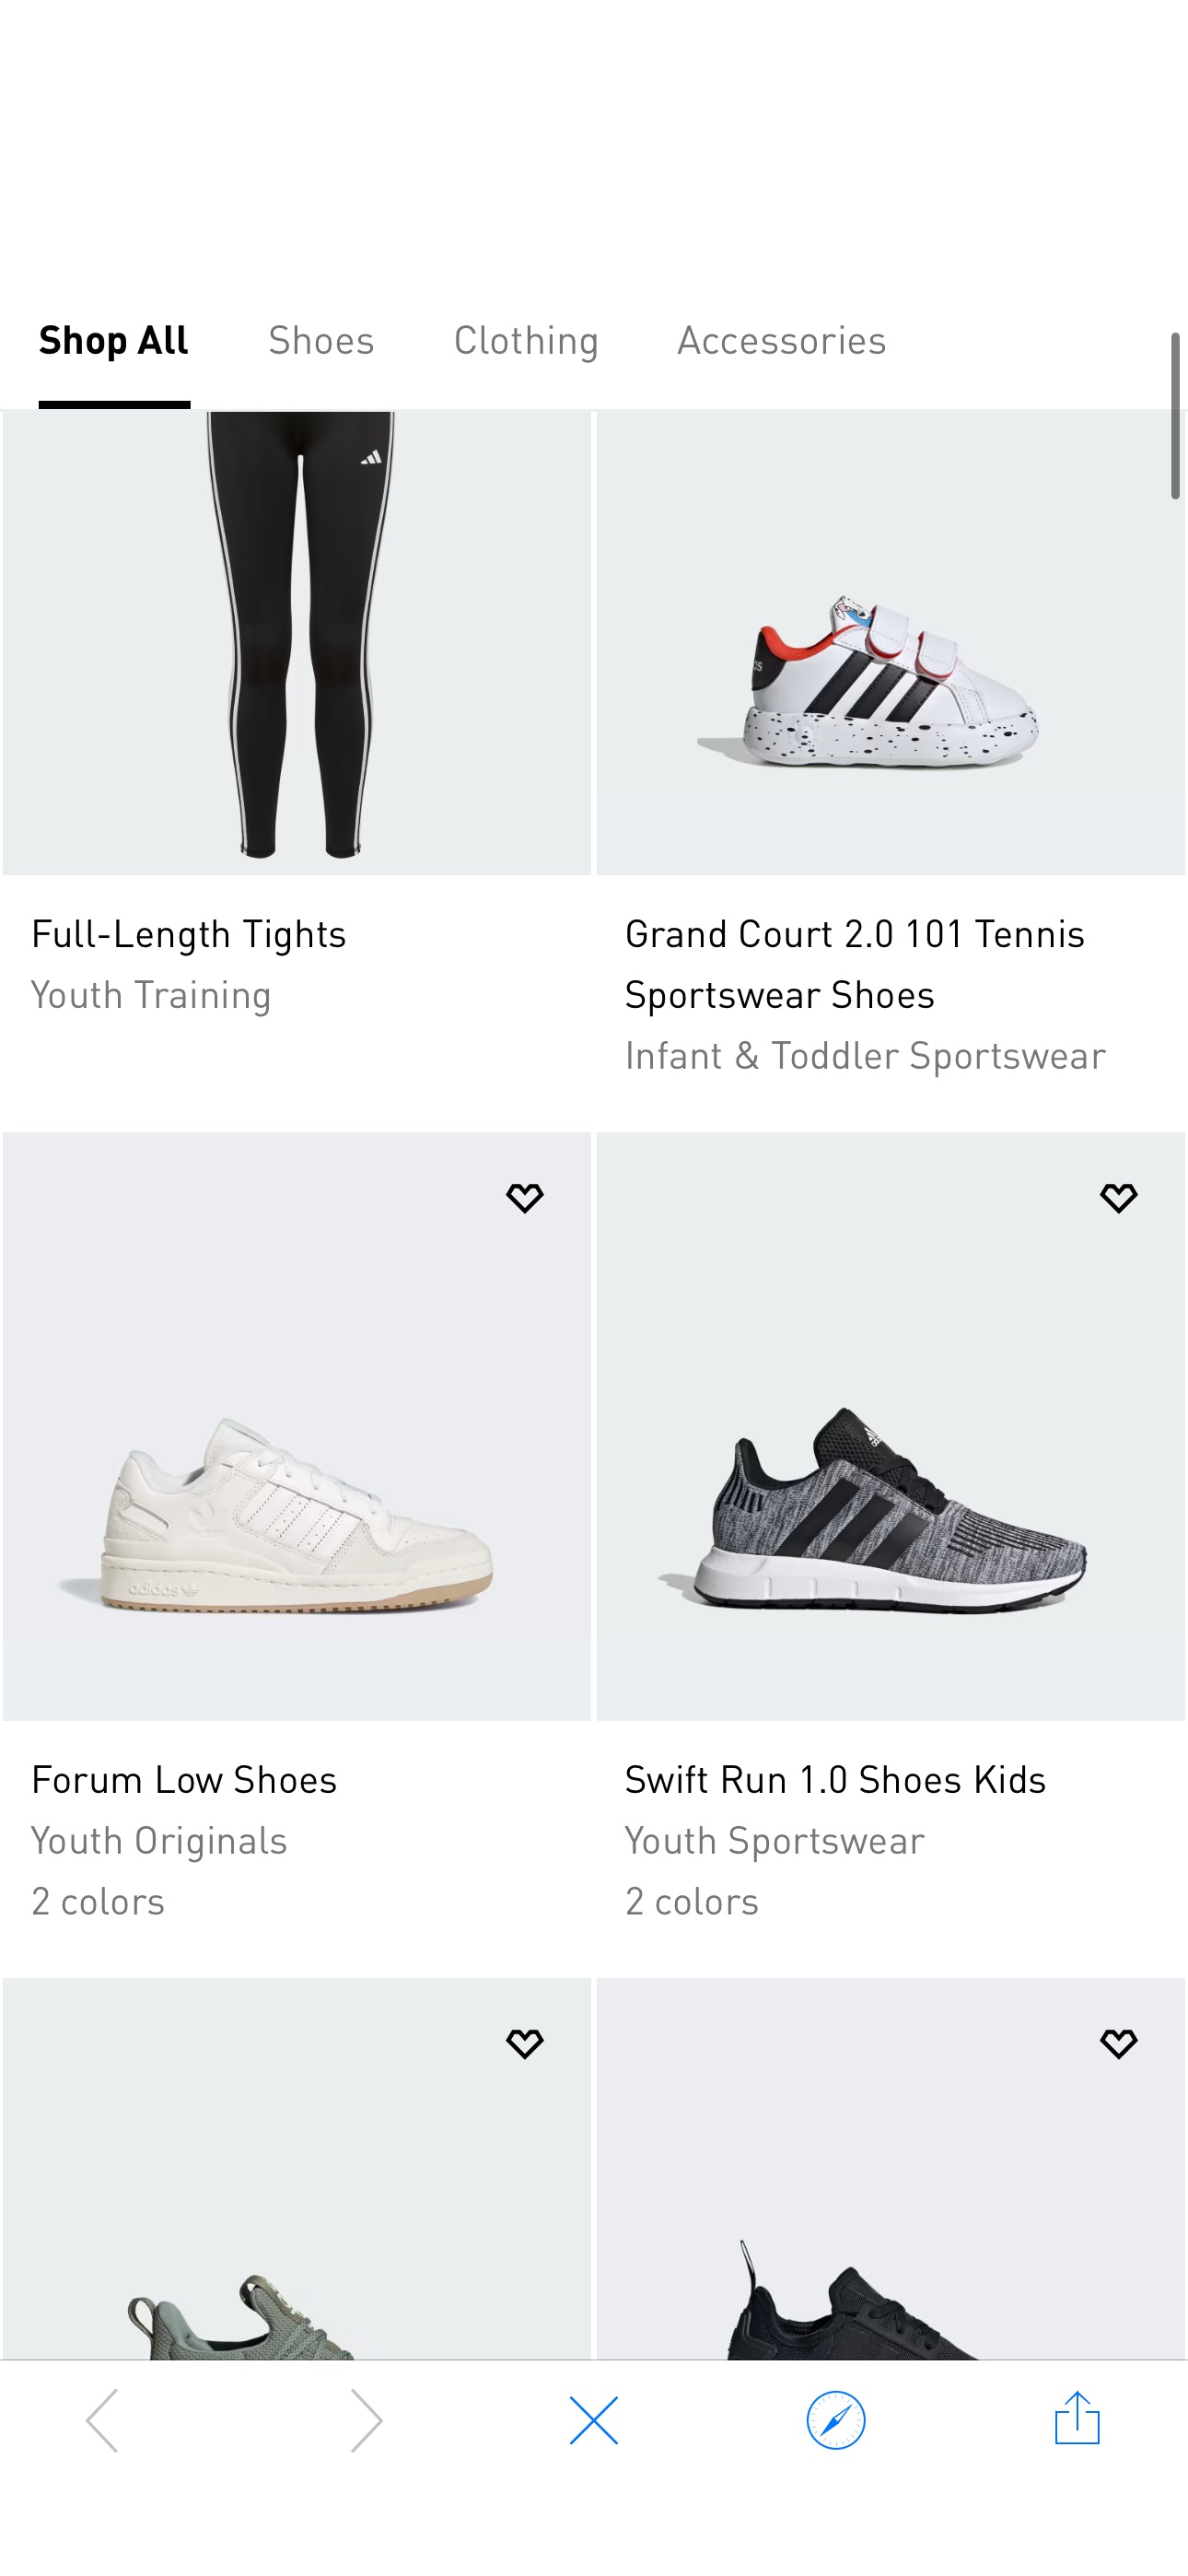 Shop Kids' Shoes & Clothing Deals | adidas US Hot Adidas Sale
Up to 70% off + extra 40% off at checkout + 15% off with code: OFF15 (log in)